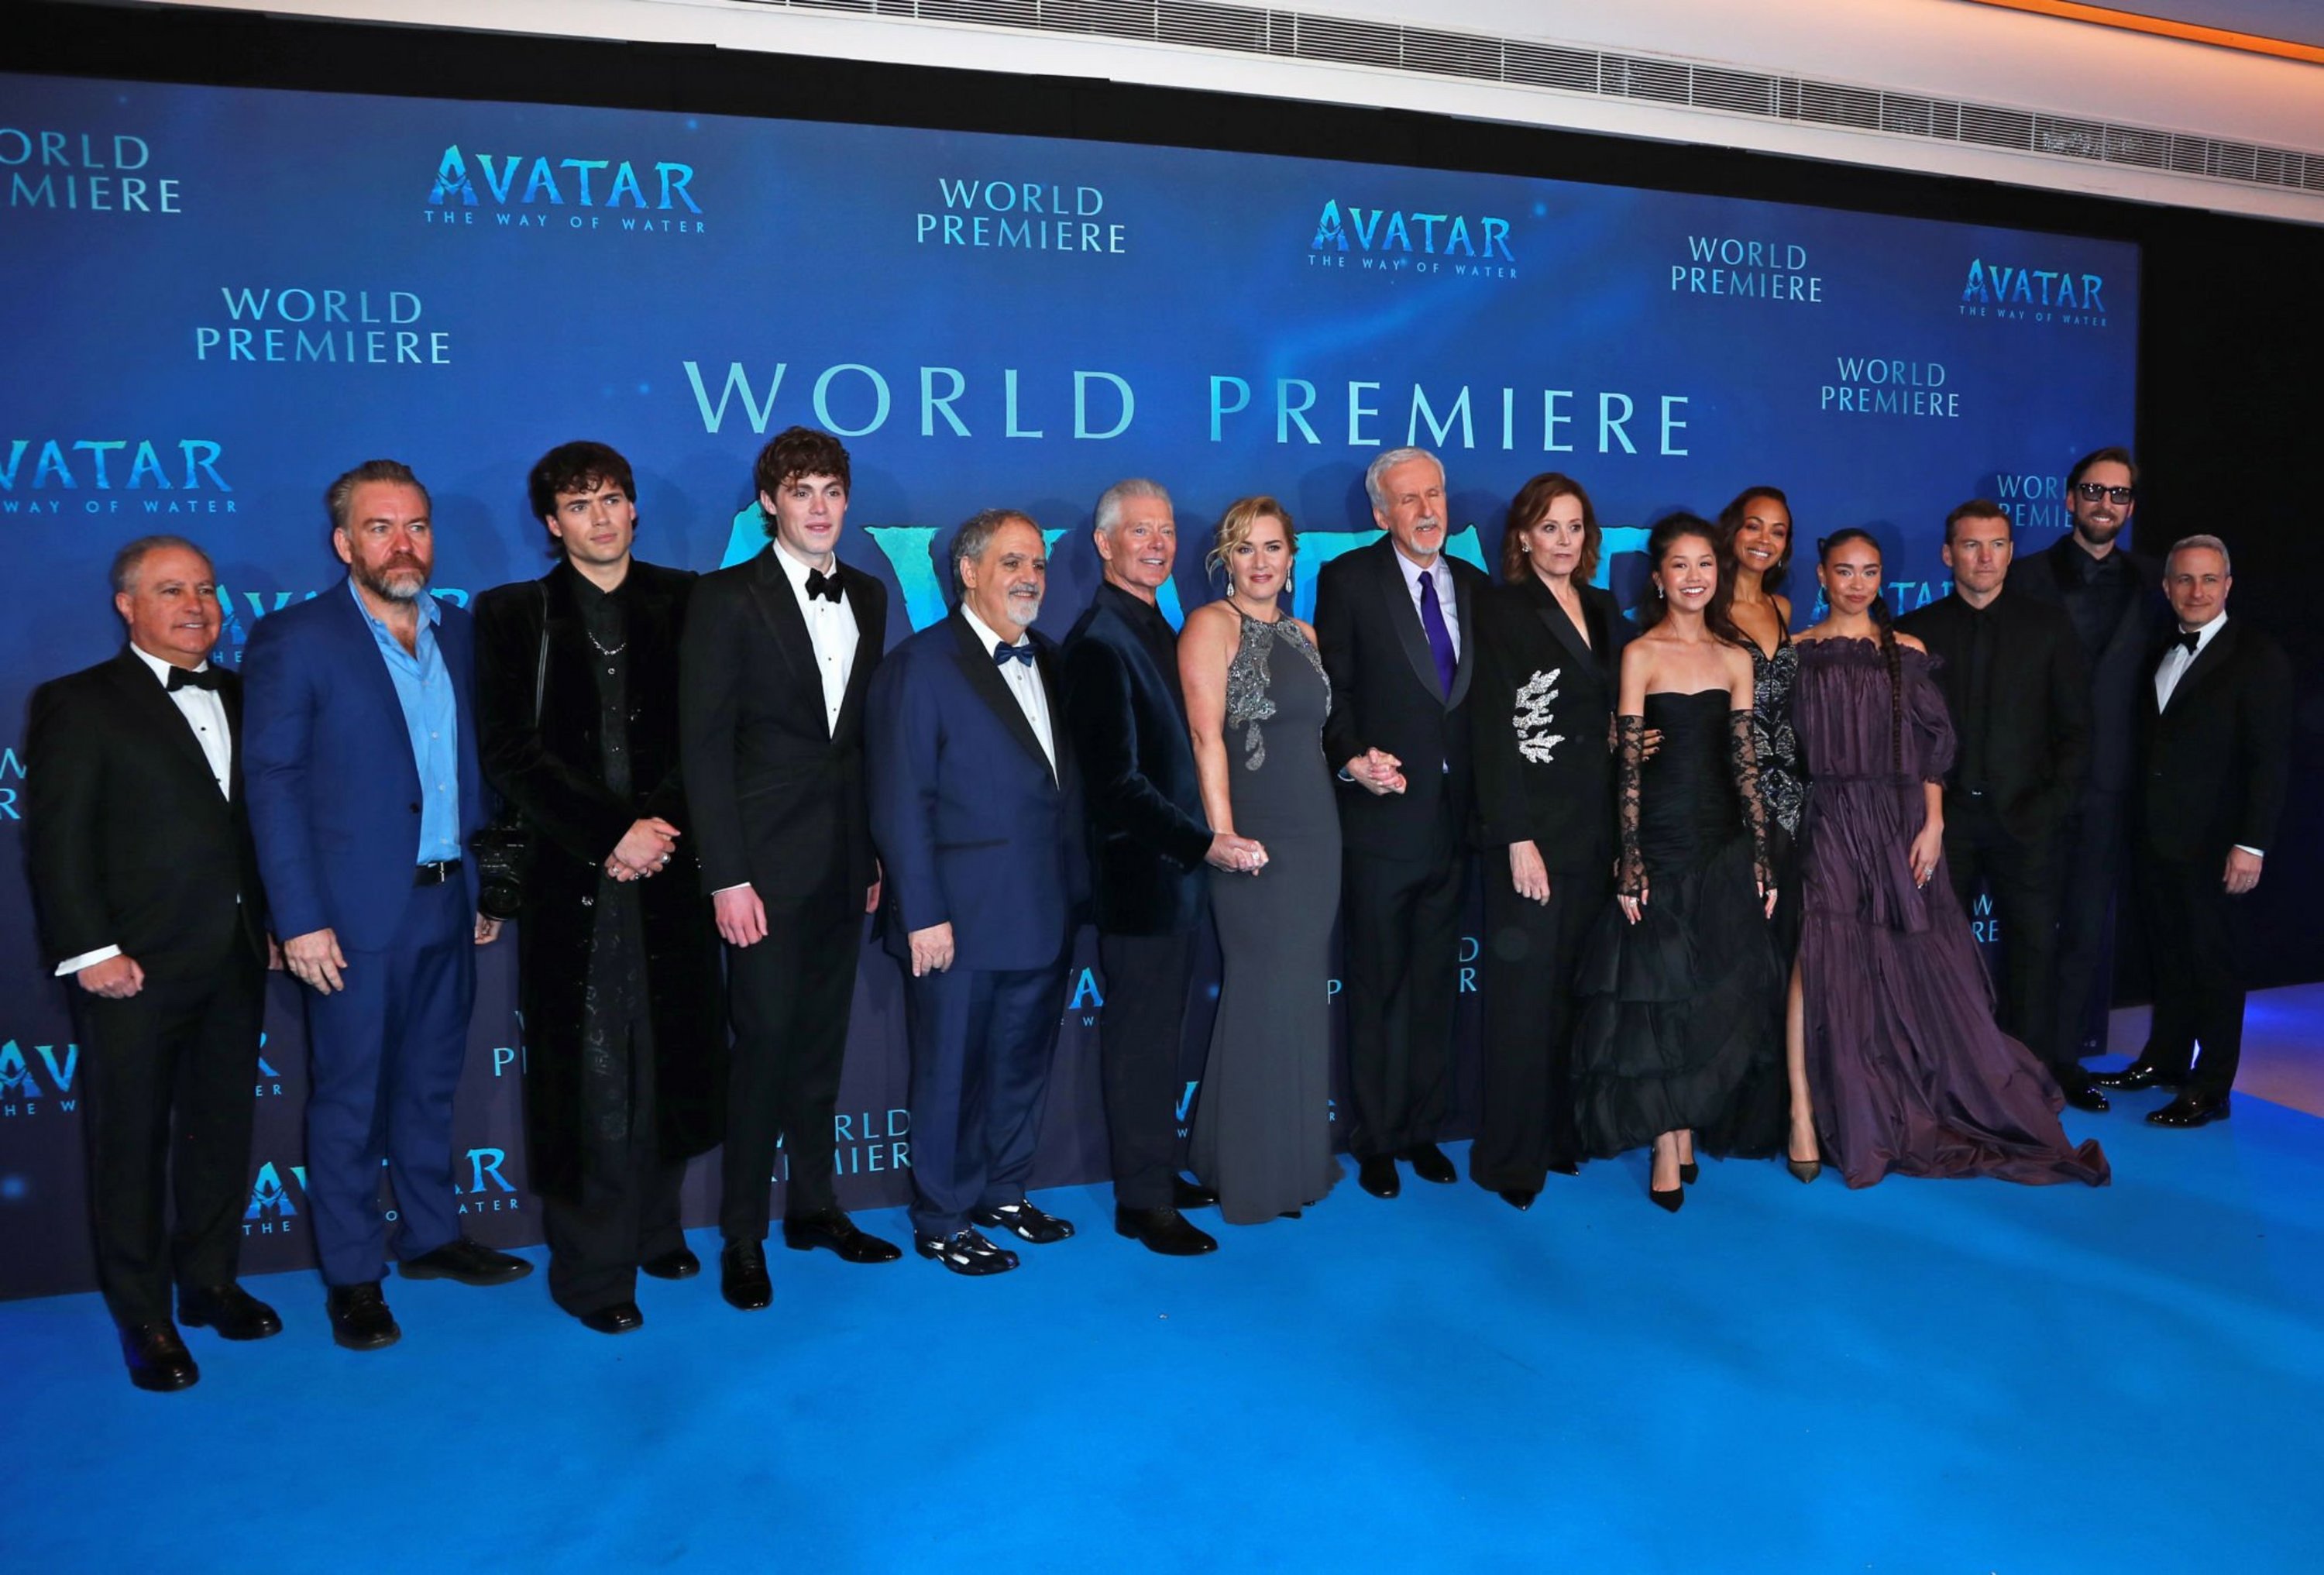 2022-12-06-Avatar-The-Way-of-the-Water-World-Premiere-041.jpg